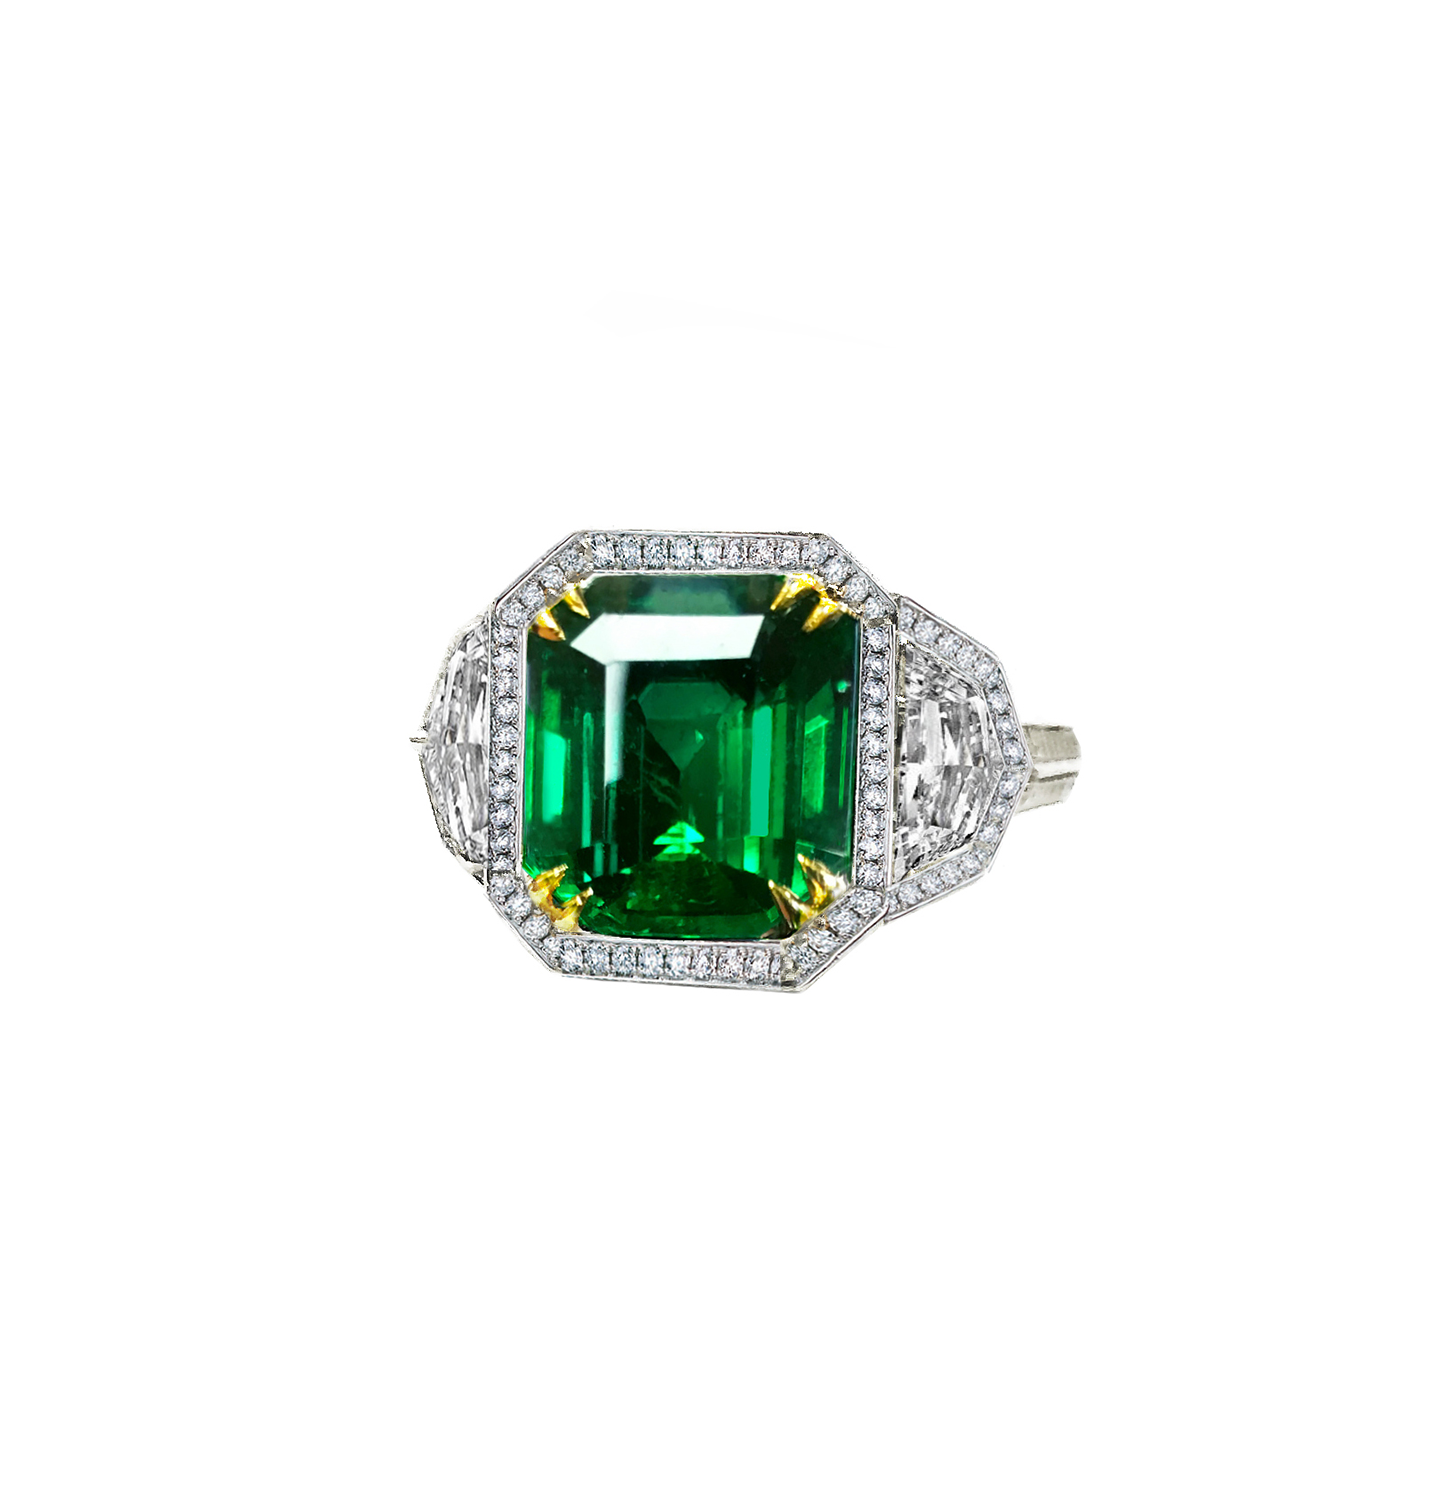 Sabel Collection Platinum and 18K Yellow Gold Emerald Cut Emerald and Diamond Ring